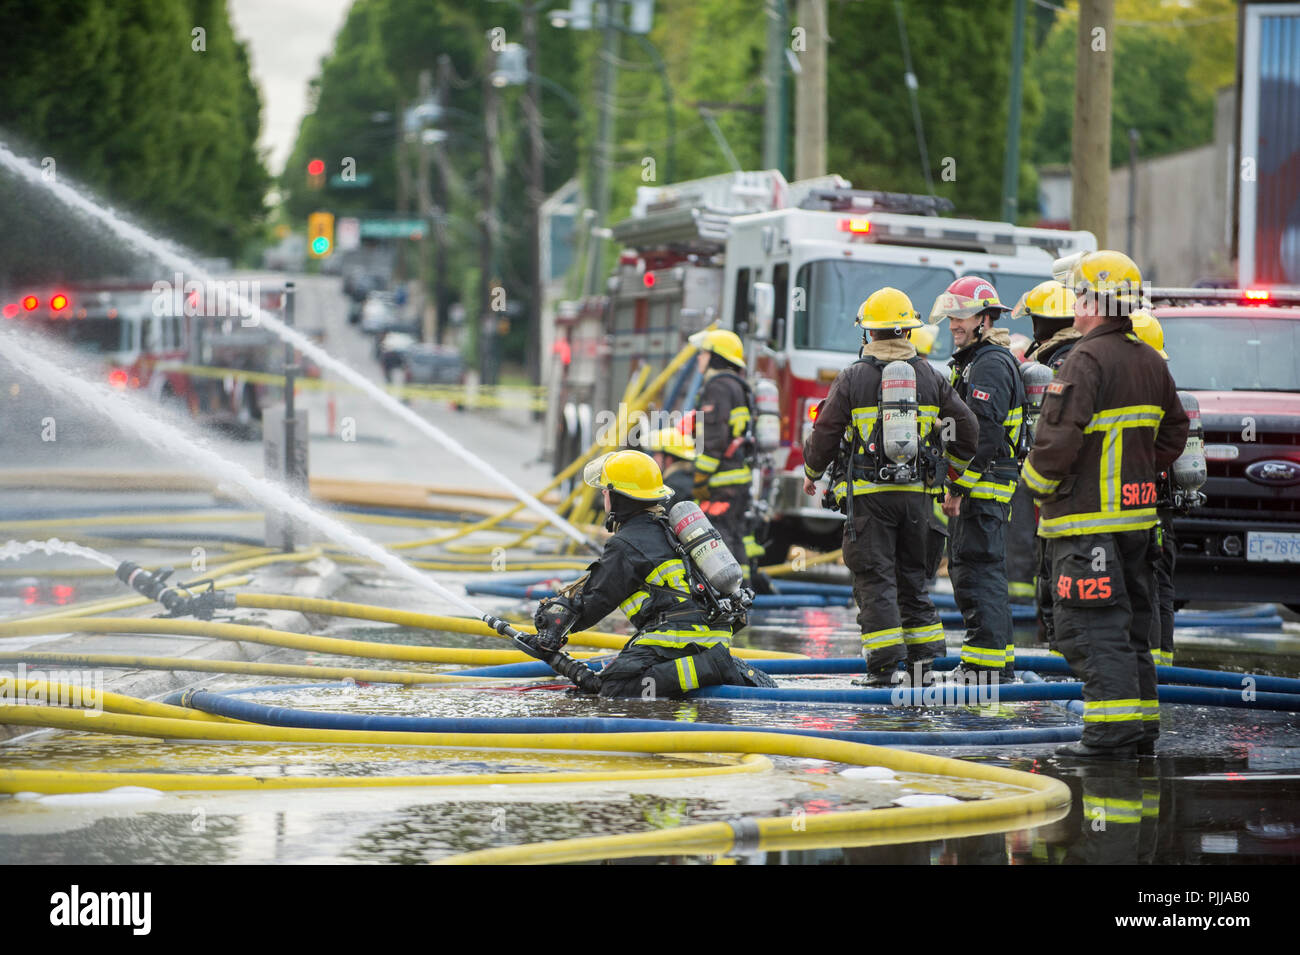 Emergency fire trucks and firemen at the scene of a house fire, Vancouver City, Stock Photo